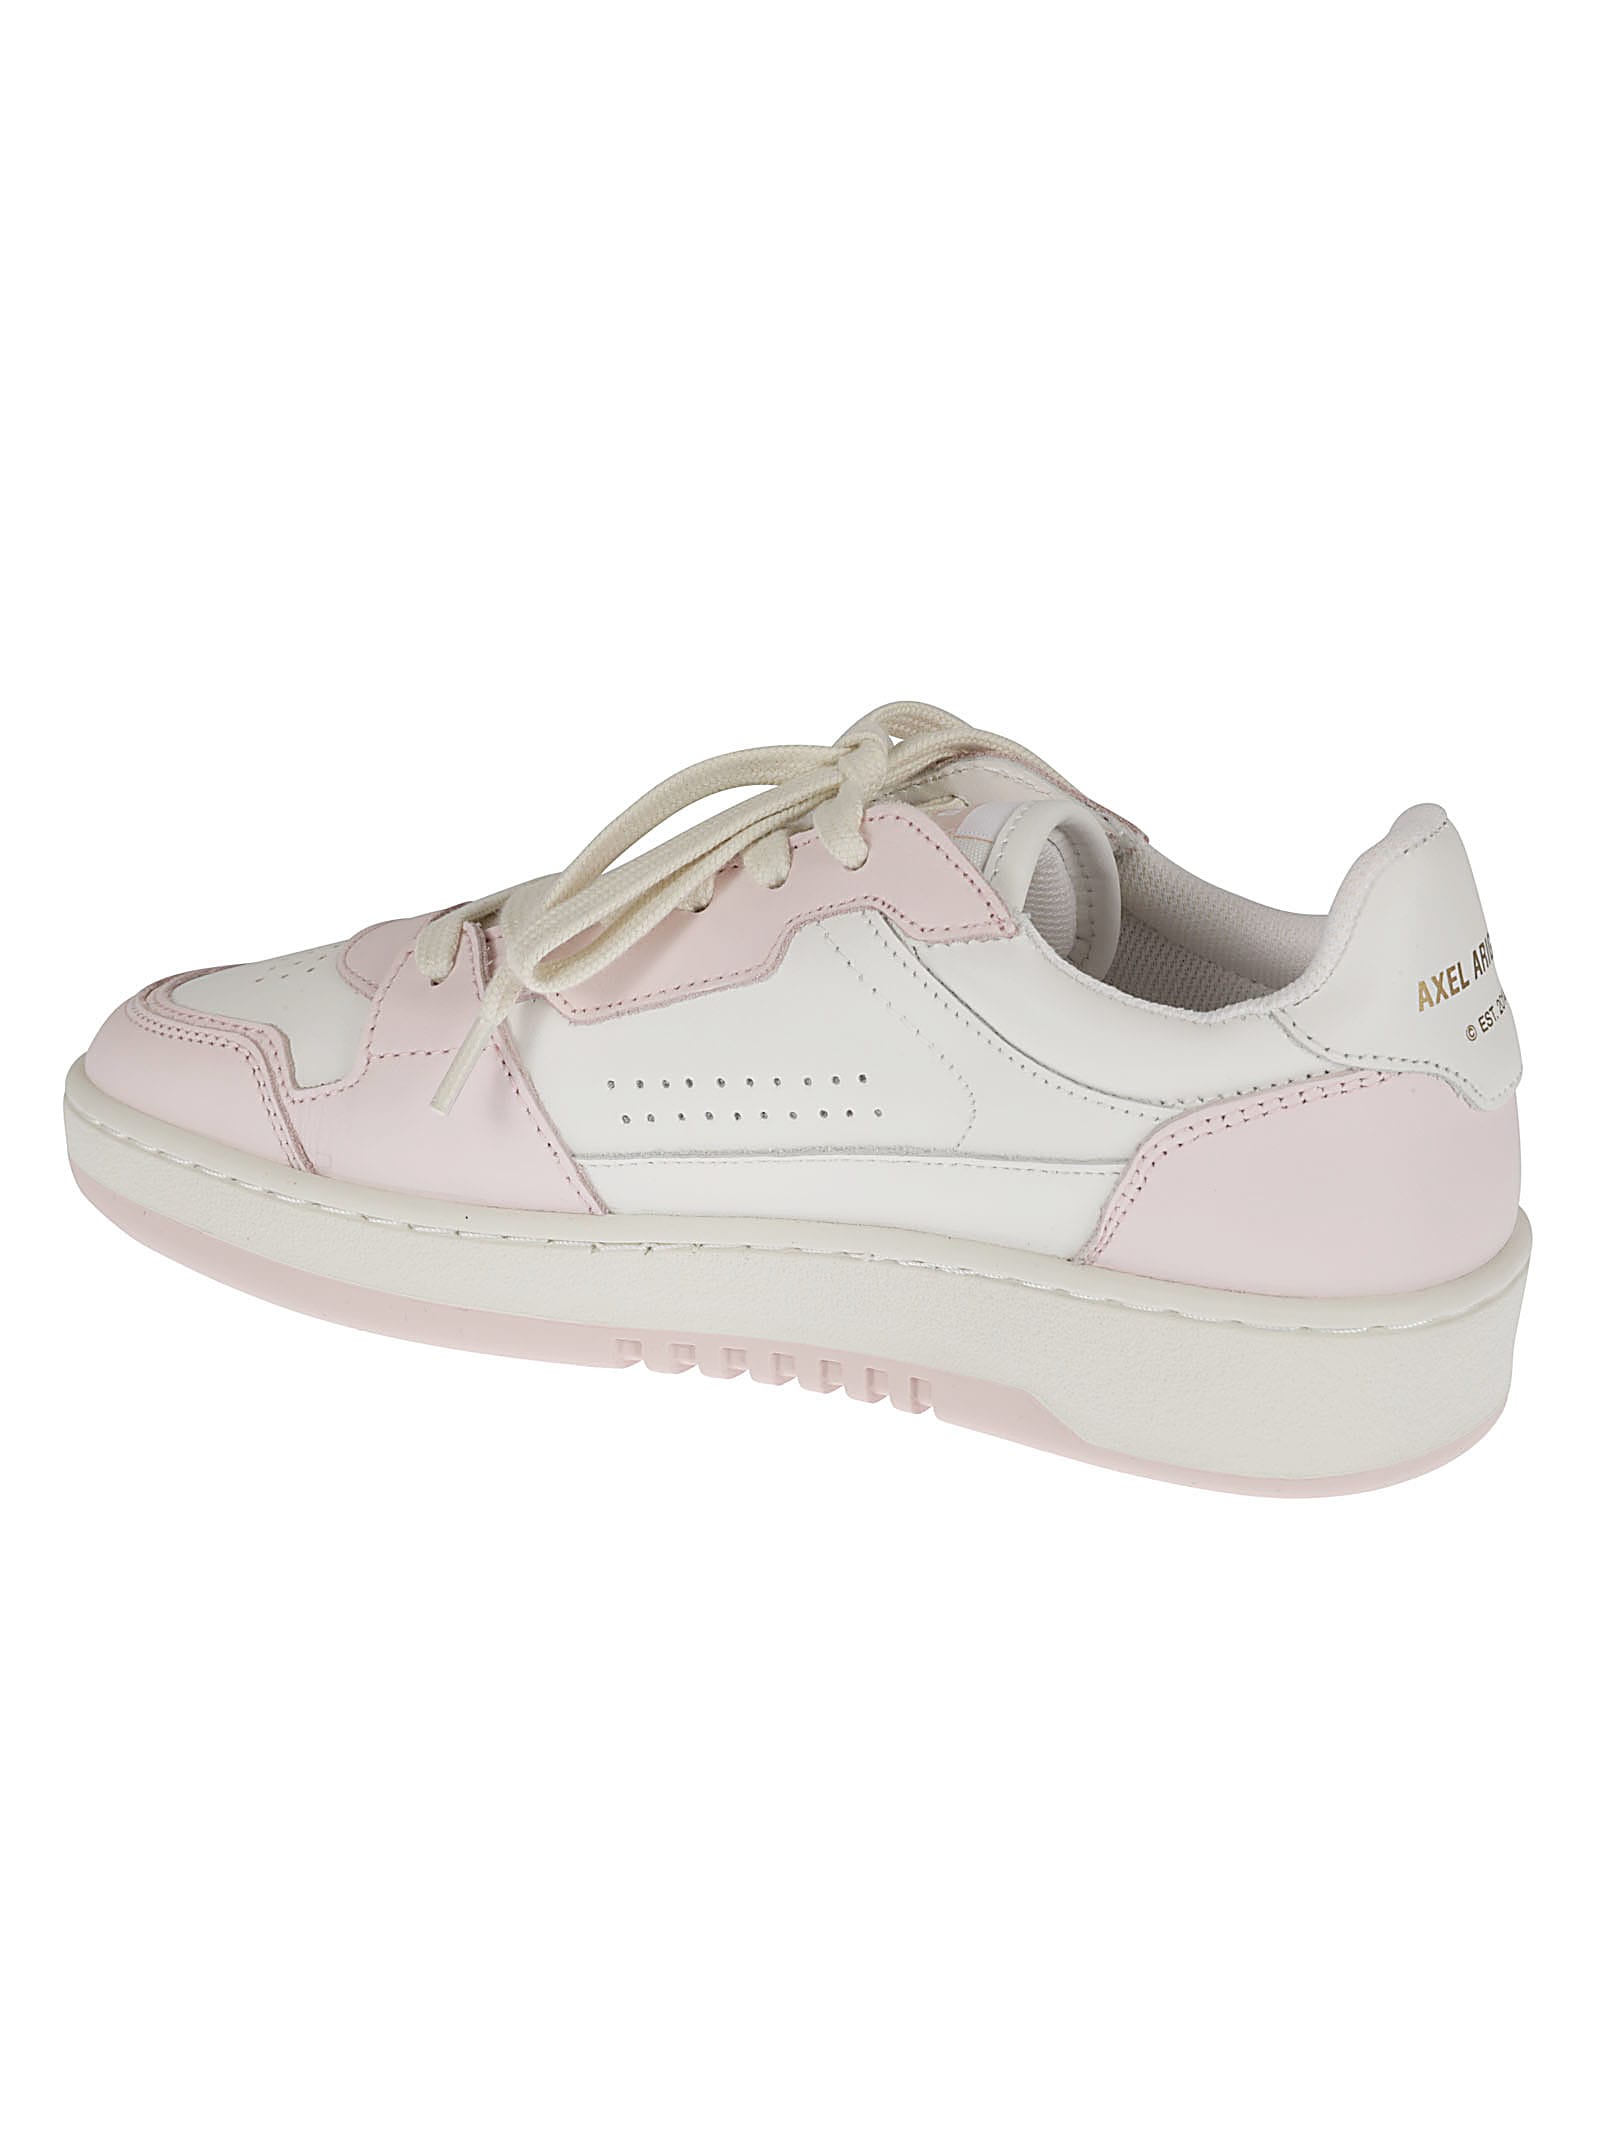 Shop Axel Arigato Dice Lo Sneakers In White/pink